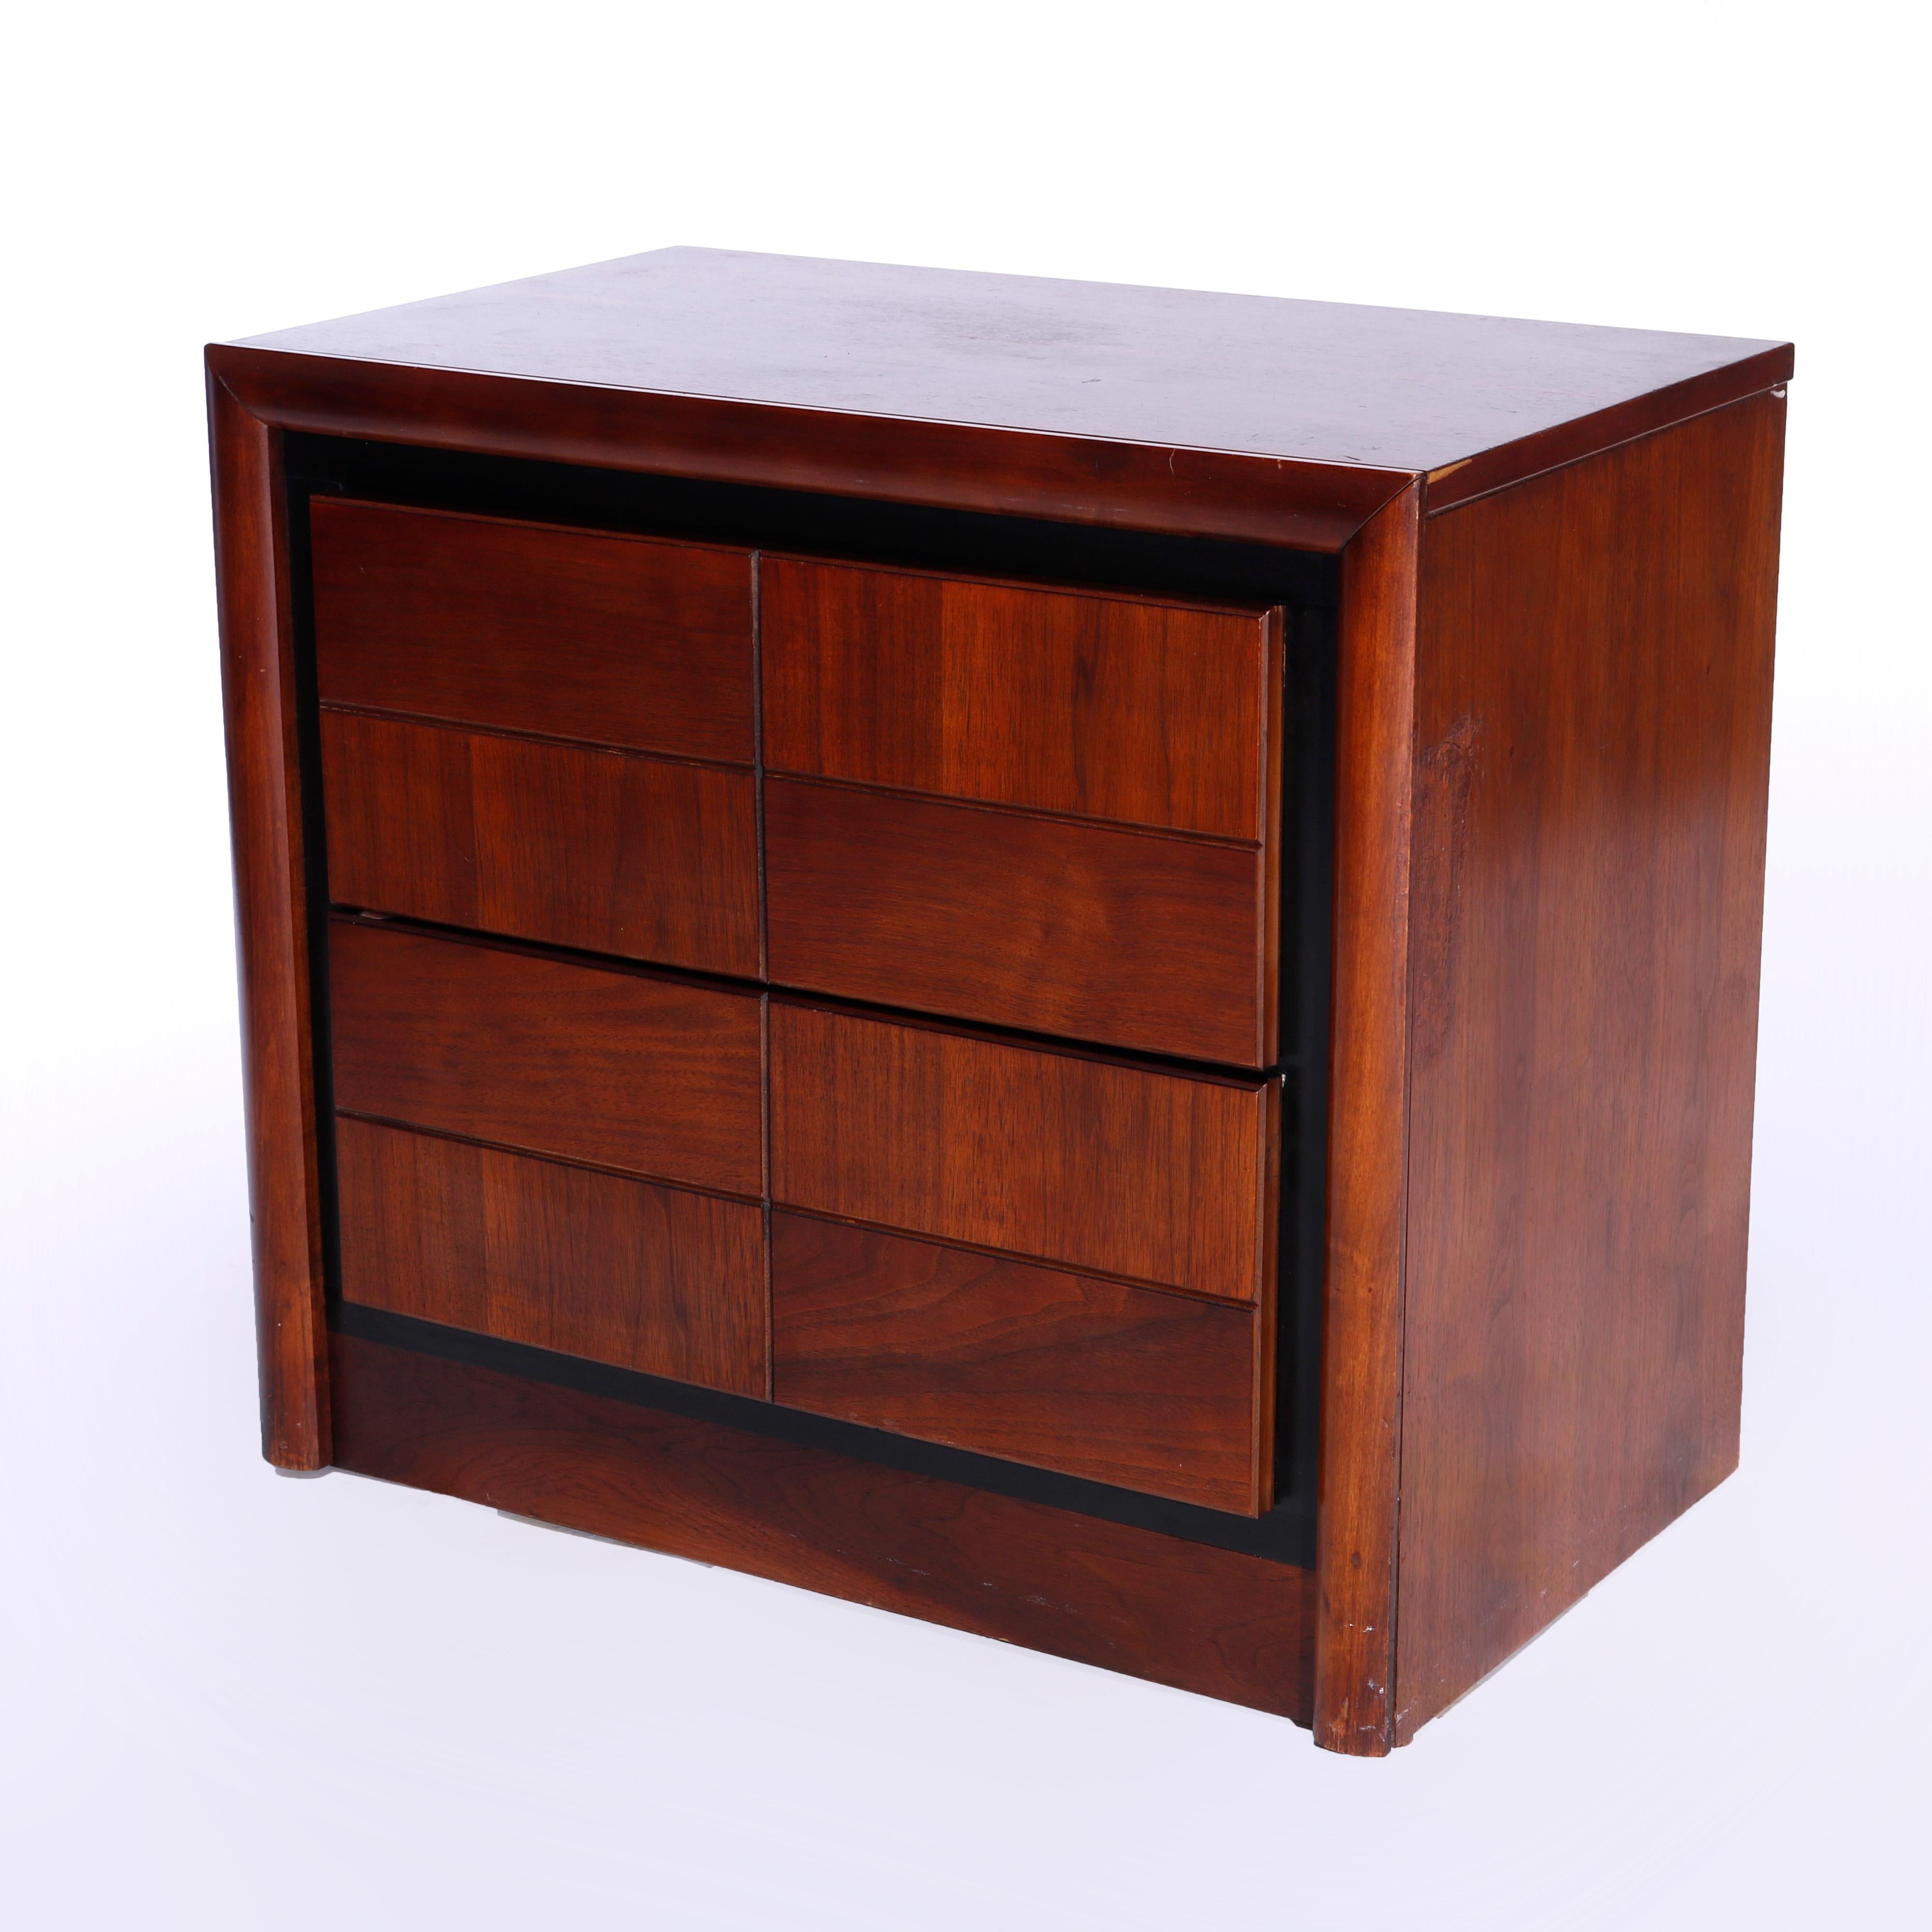 A Mid-Century Modern low chest by Bassett offers two long drawers with bookmatched mahogany parquetry facing and ebonized bordering, Glen Walnut stenciled on back, 20th century

Measures - 23'' H x 26'' W x 15.75'' D.

Catalogue Note: Ask about